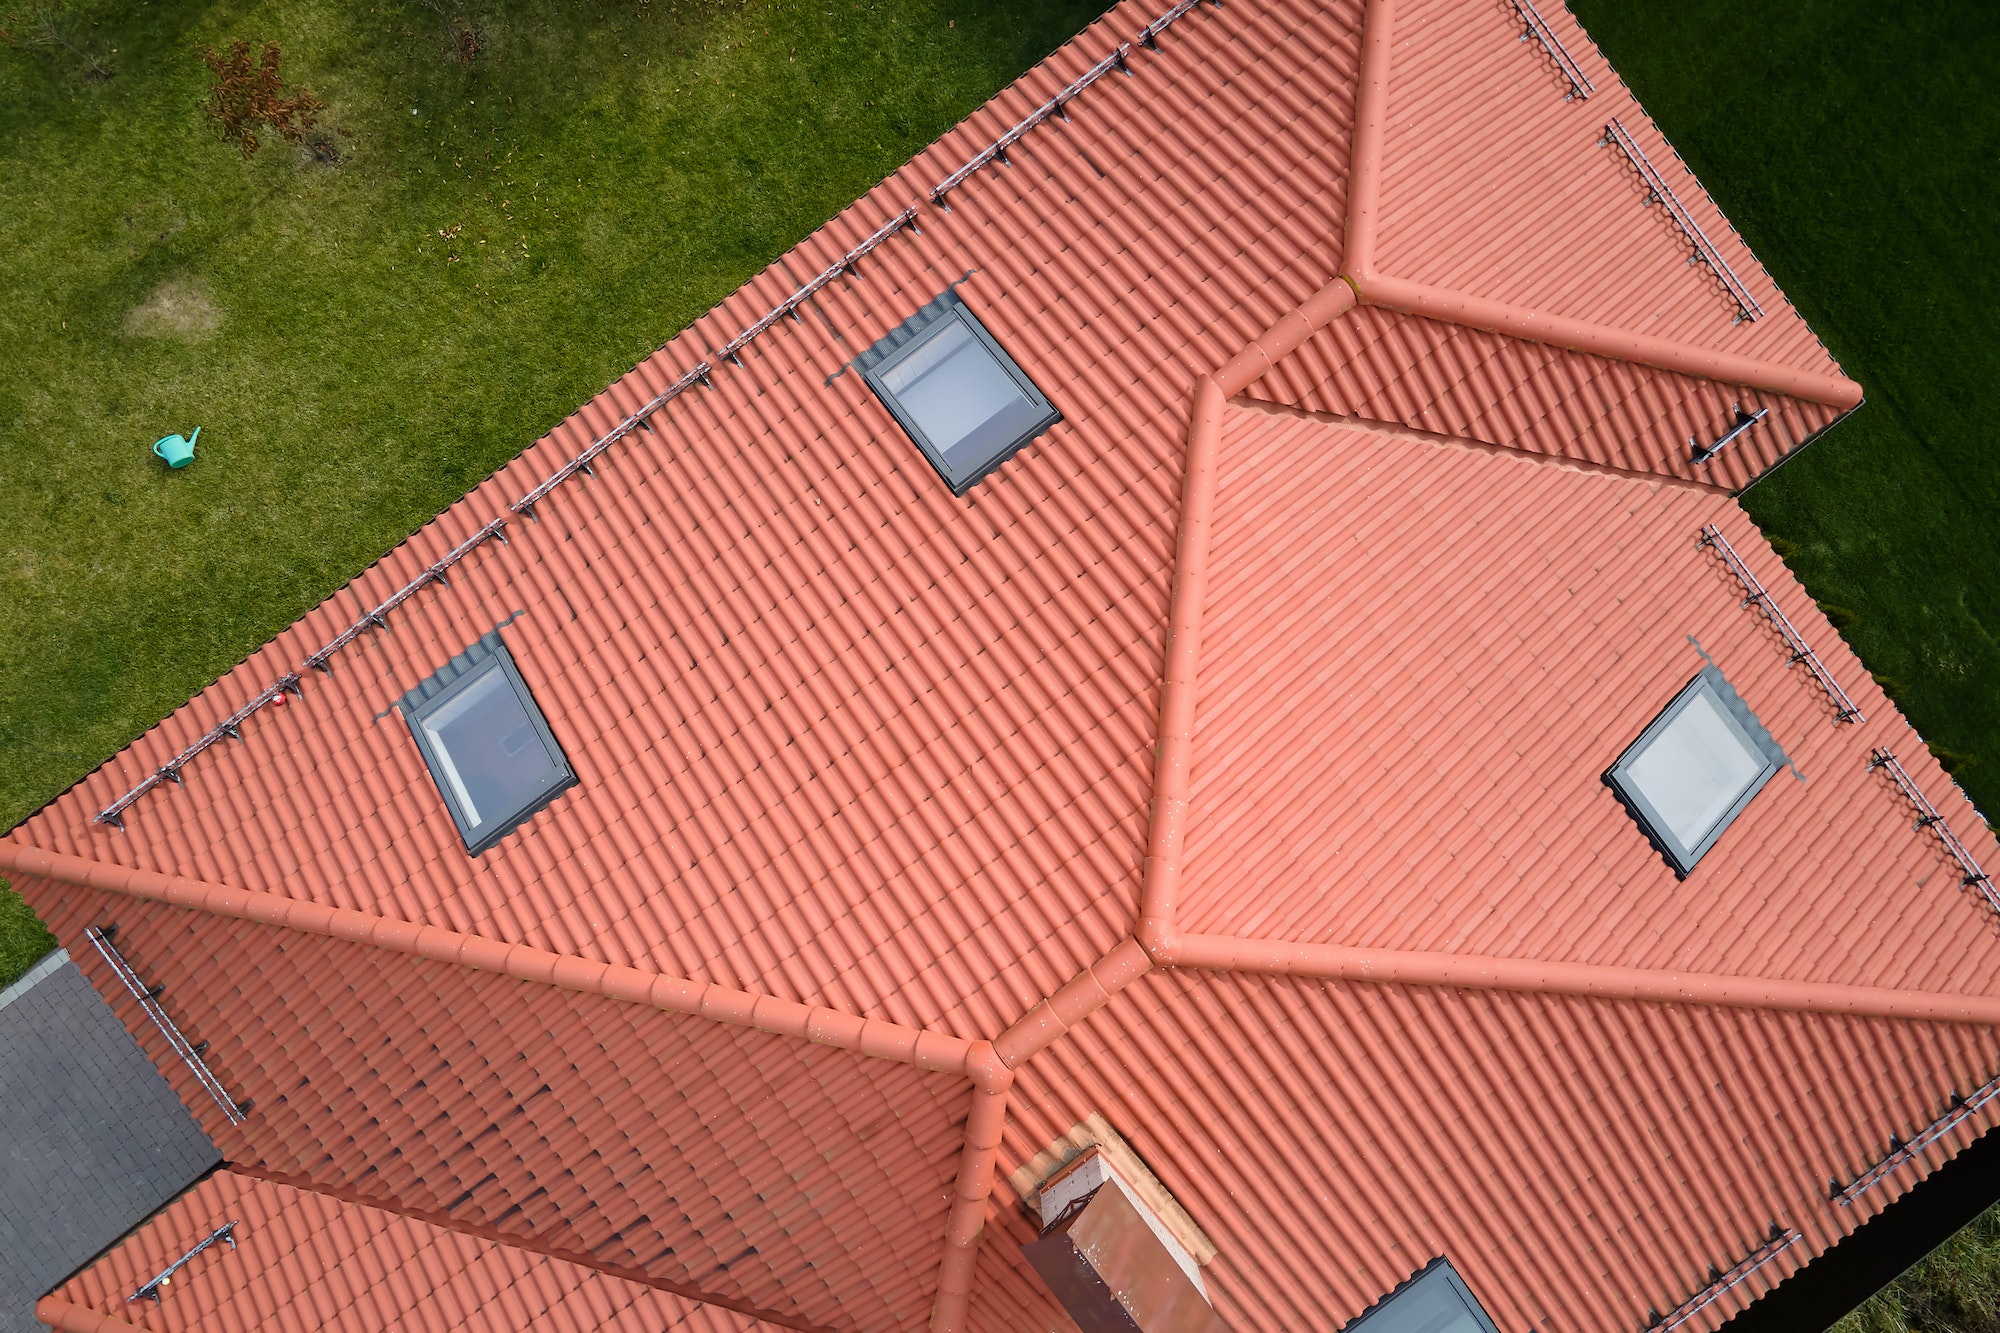 Closeup of attic windows on house roof top covered with ceramic shingles. Tiled covering of building